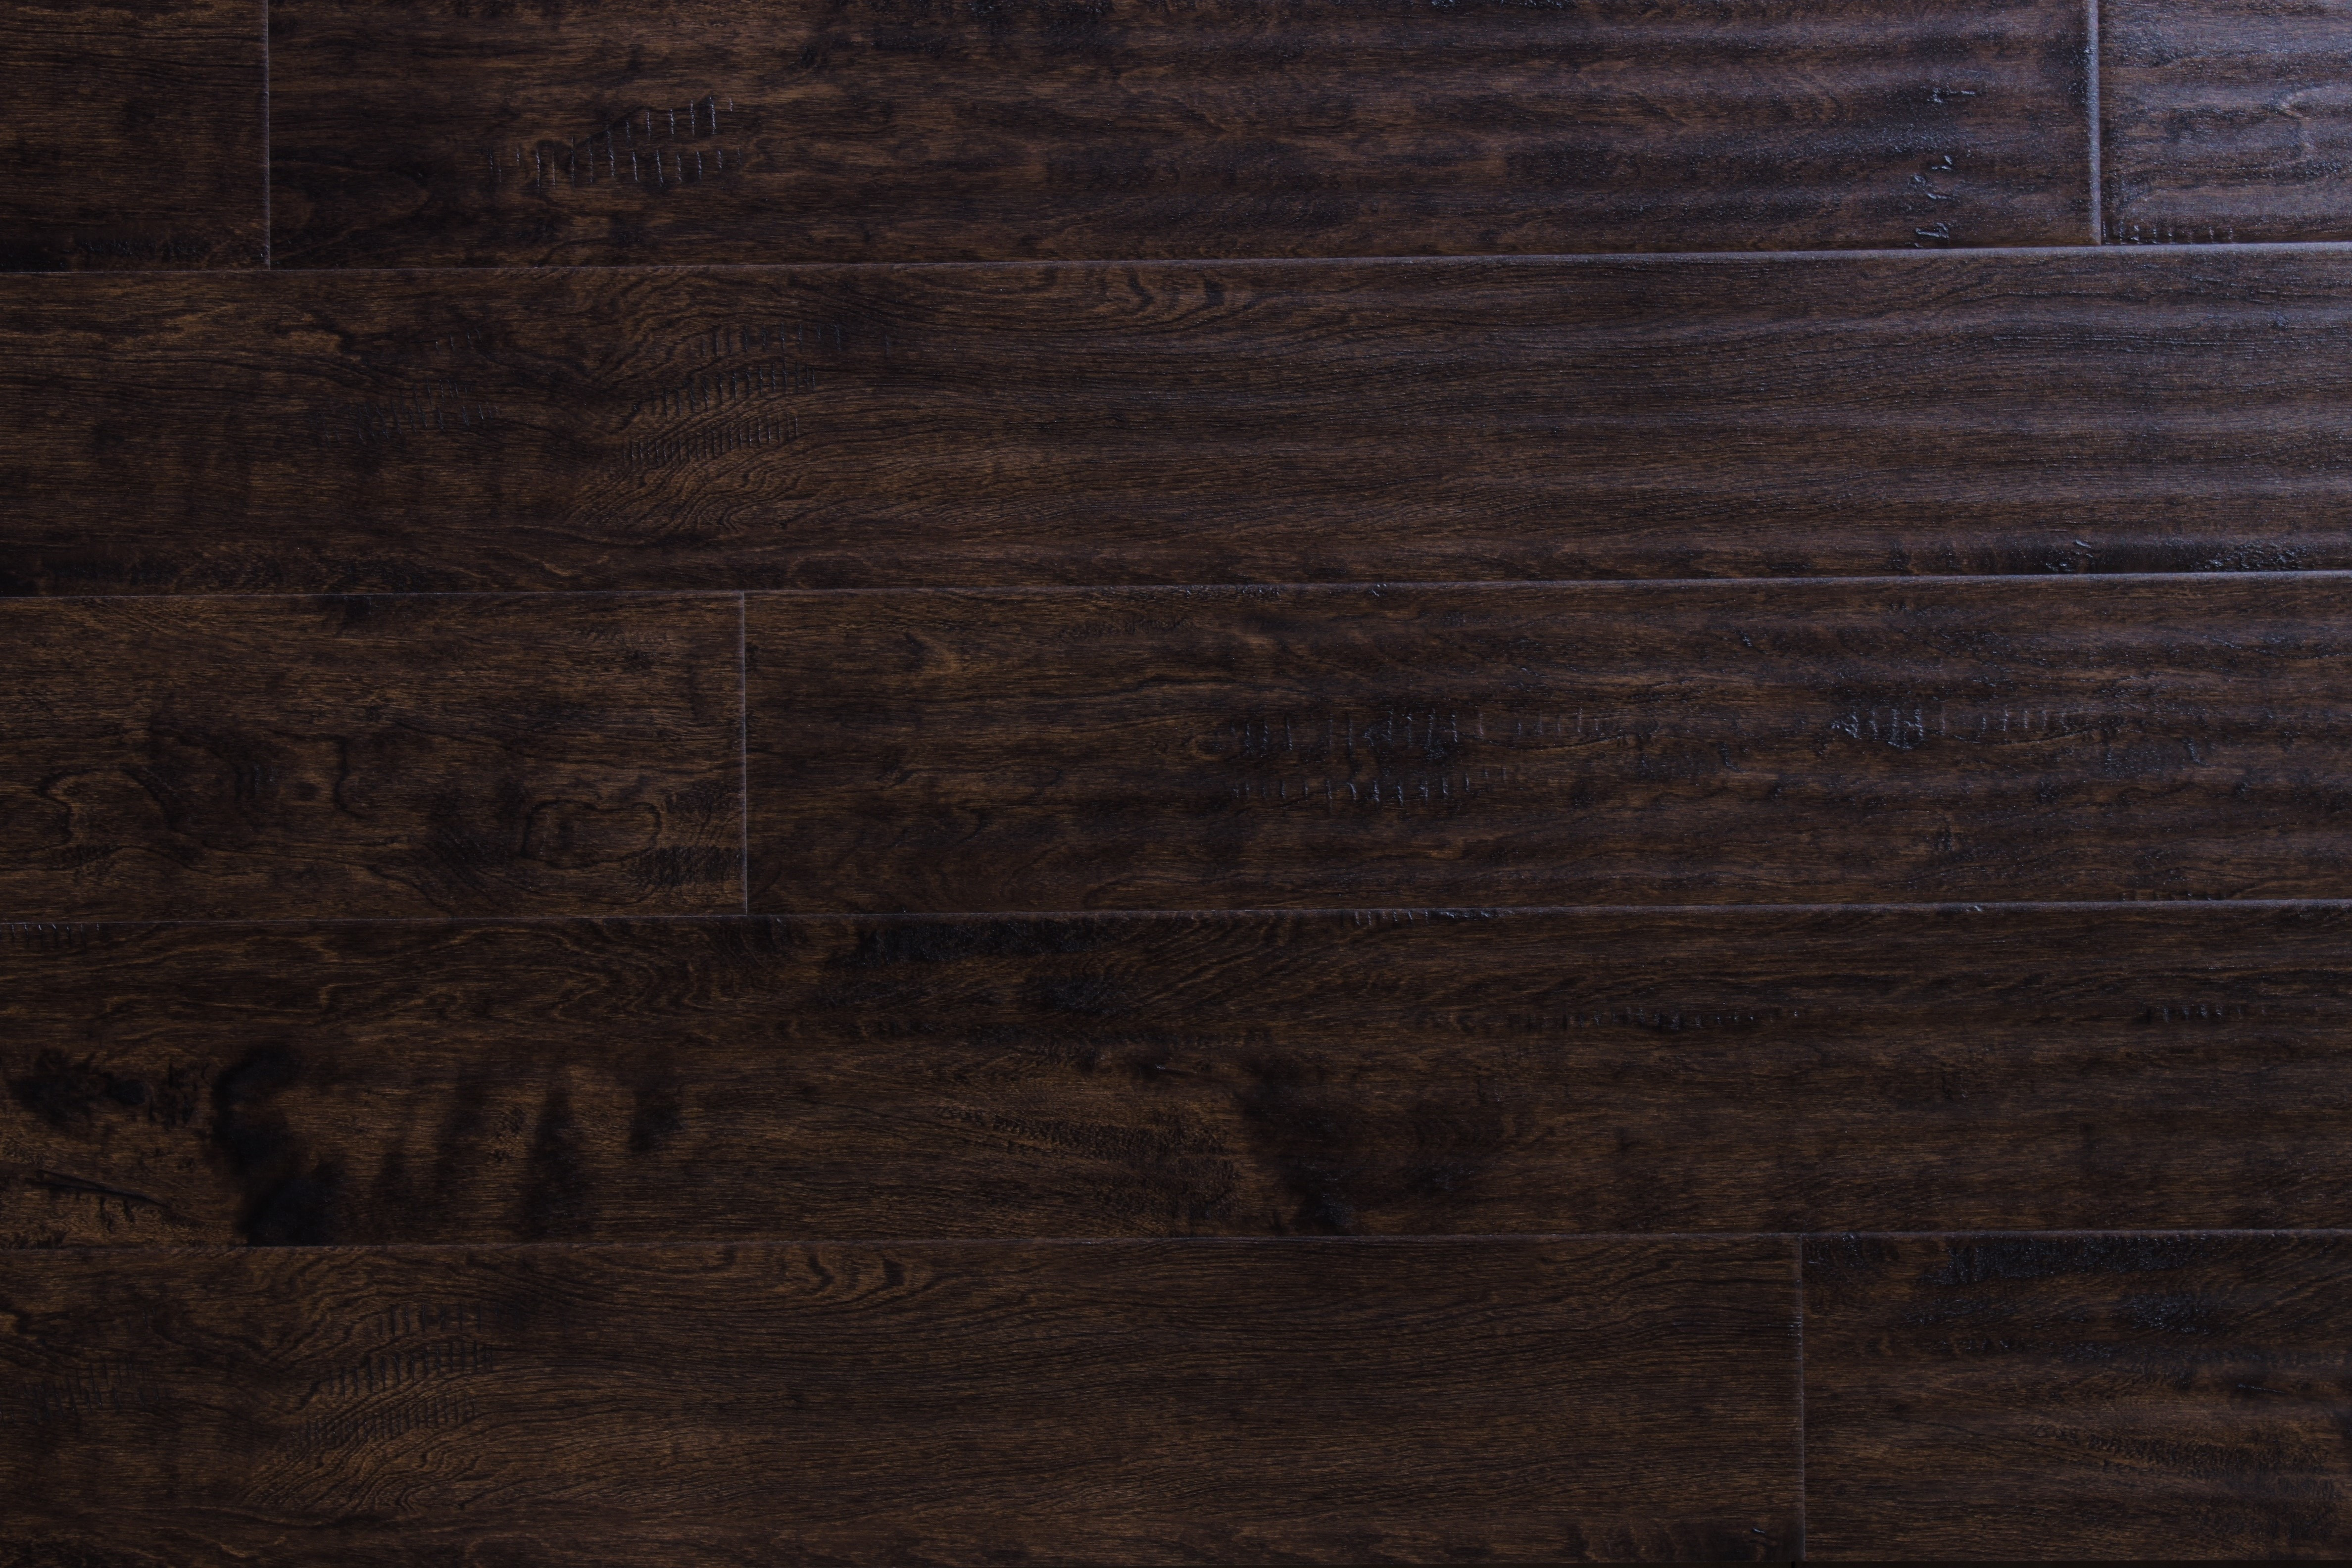 distressed red oak hardwood flooring of wood flooring free samples available at builddirecta with regard to tailor multi gb 5874277bb8d3c